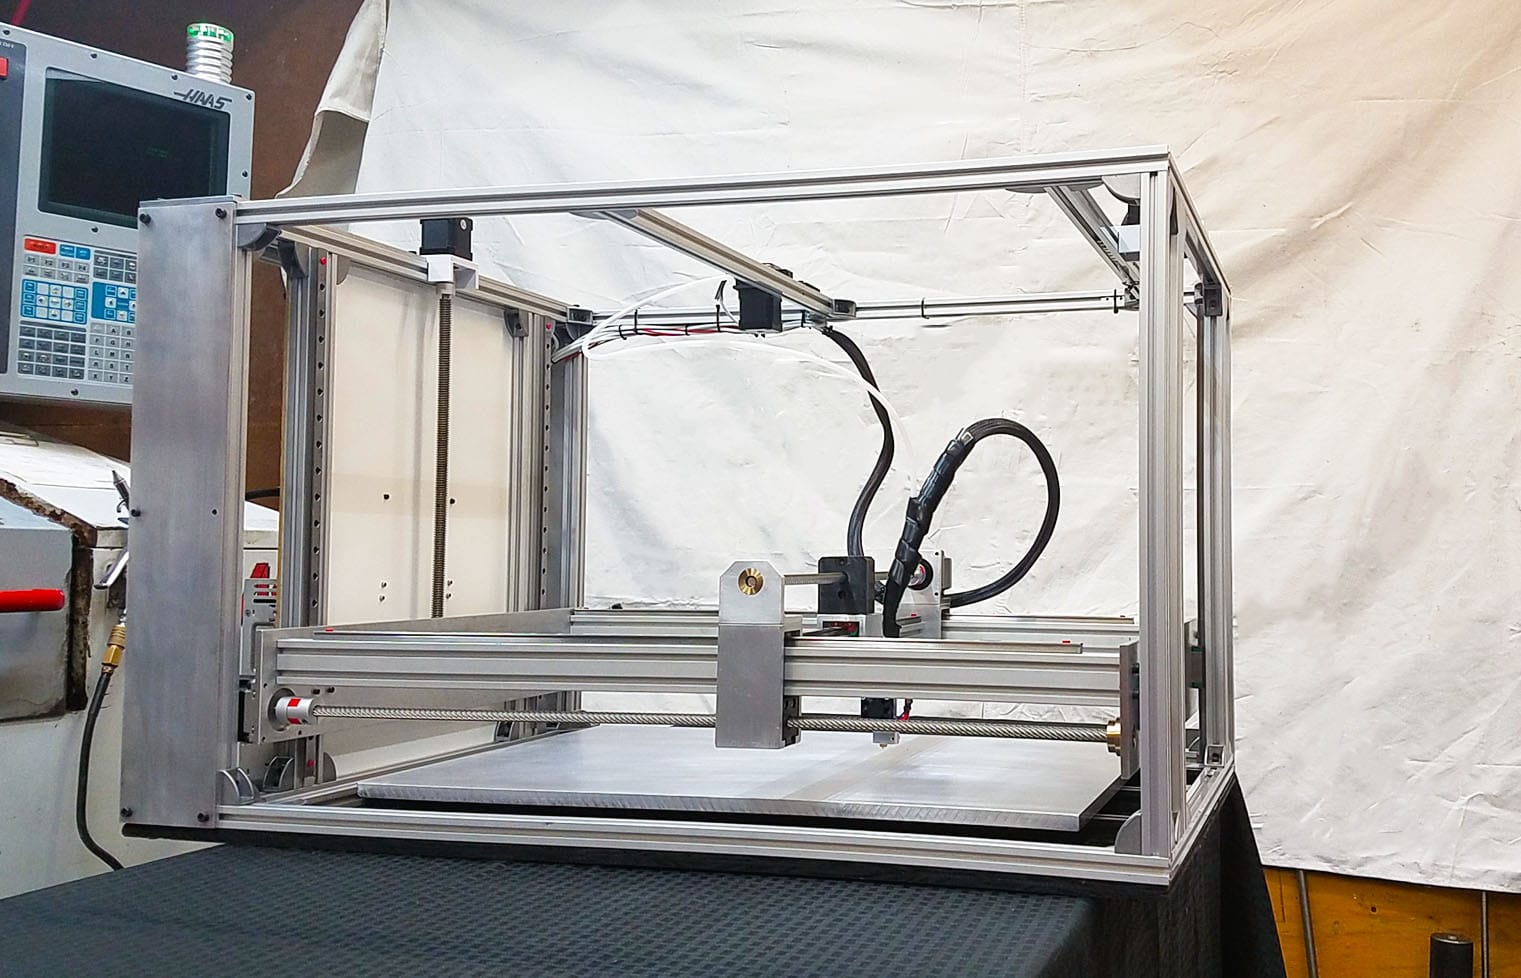 Workhorse 3D Printer – The Ultimate Machine for High-Quality 3D Printing